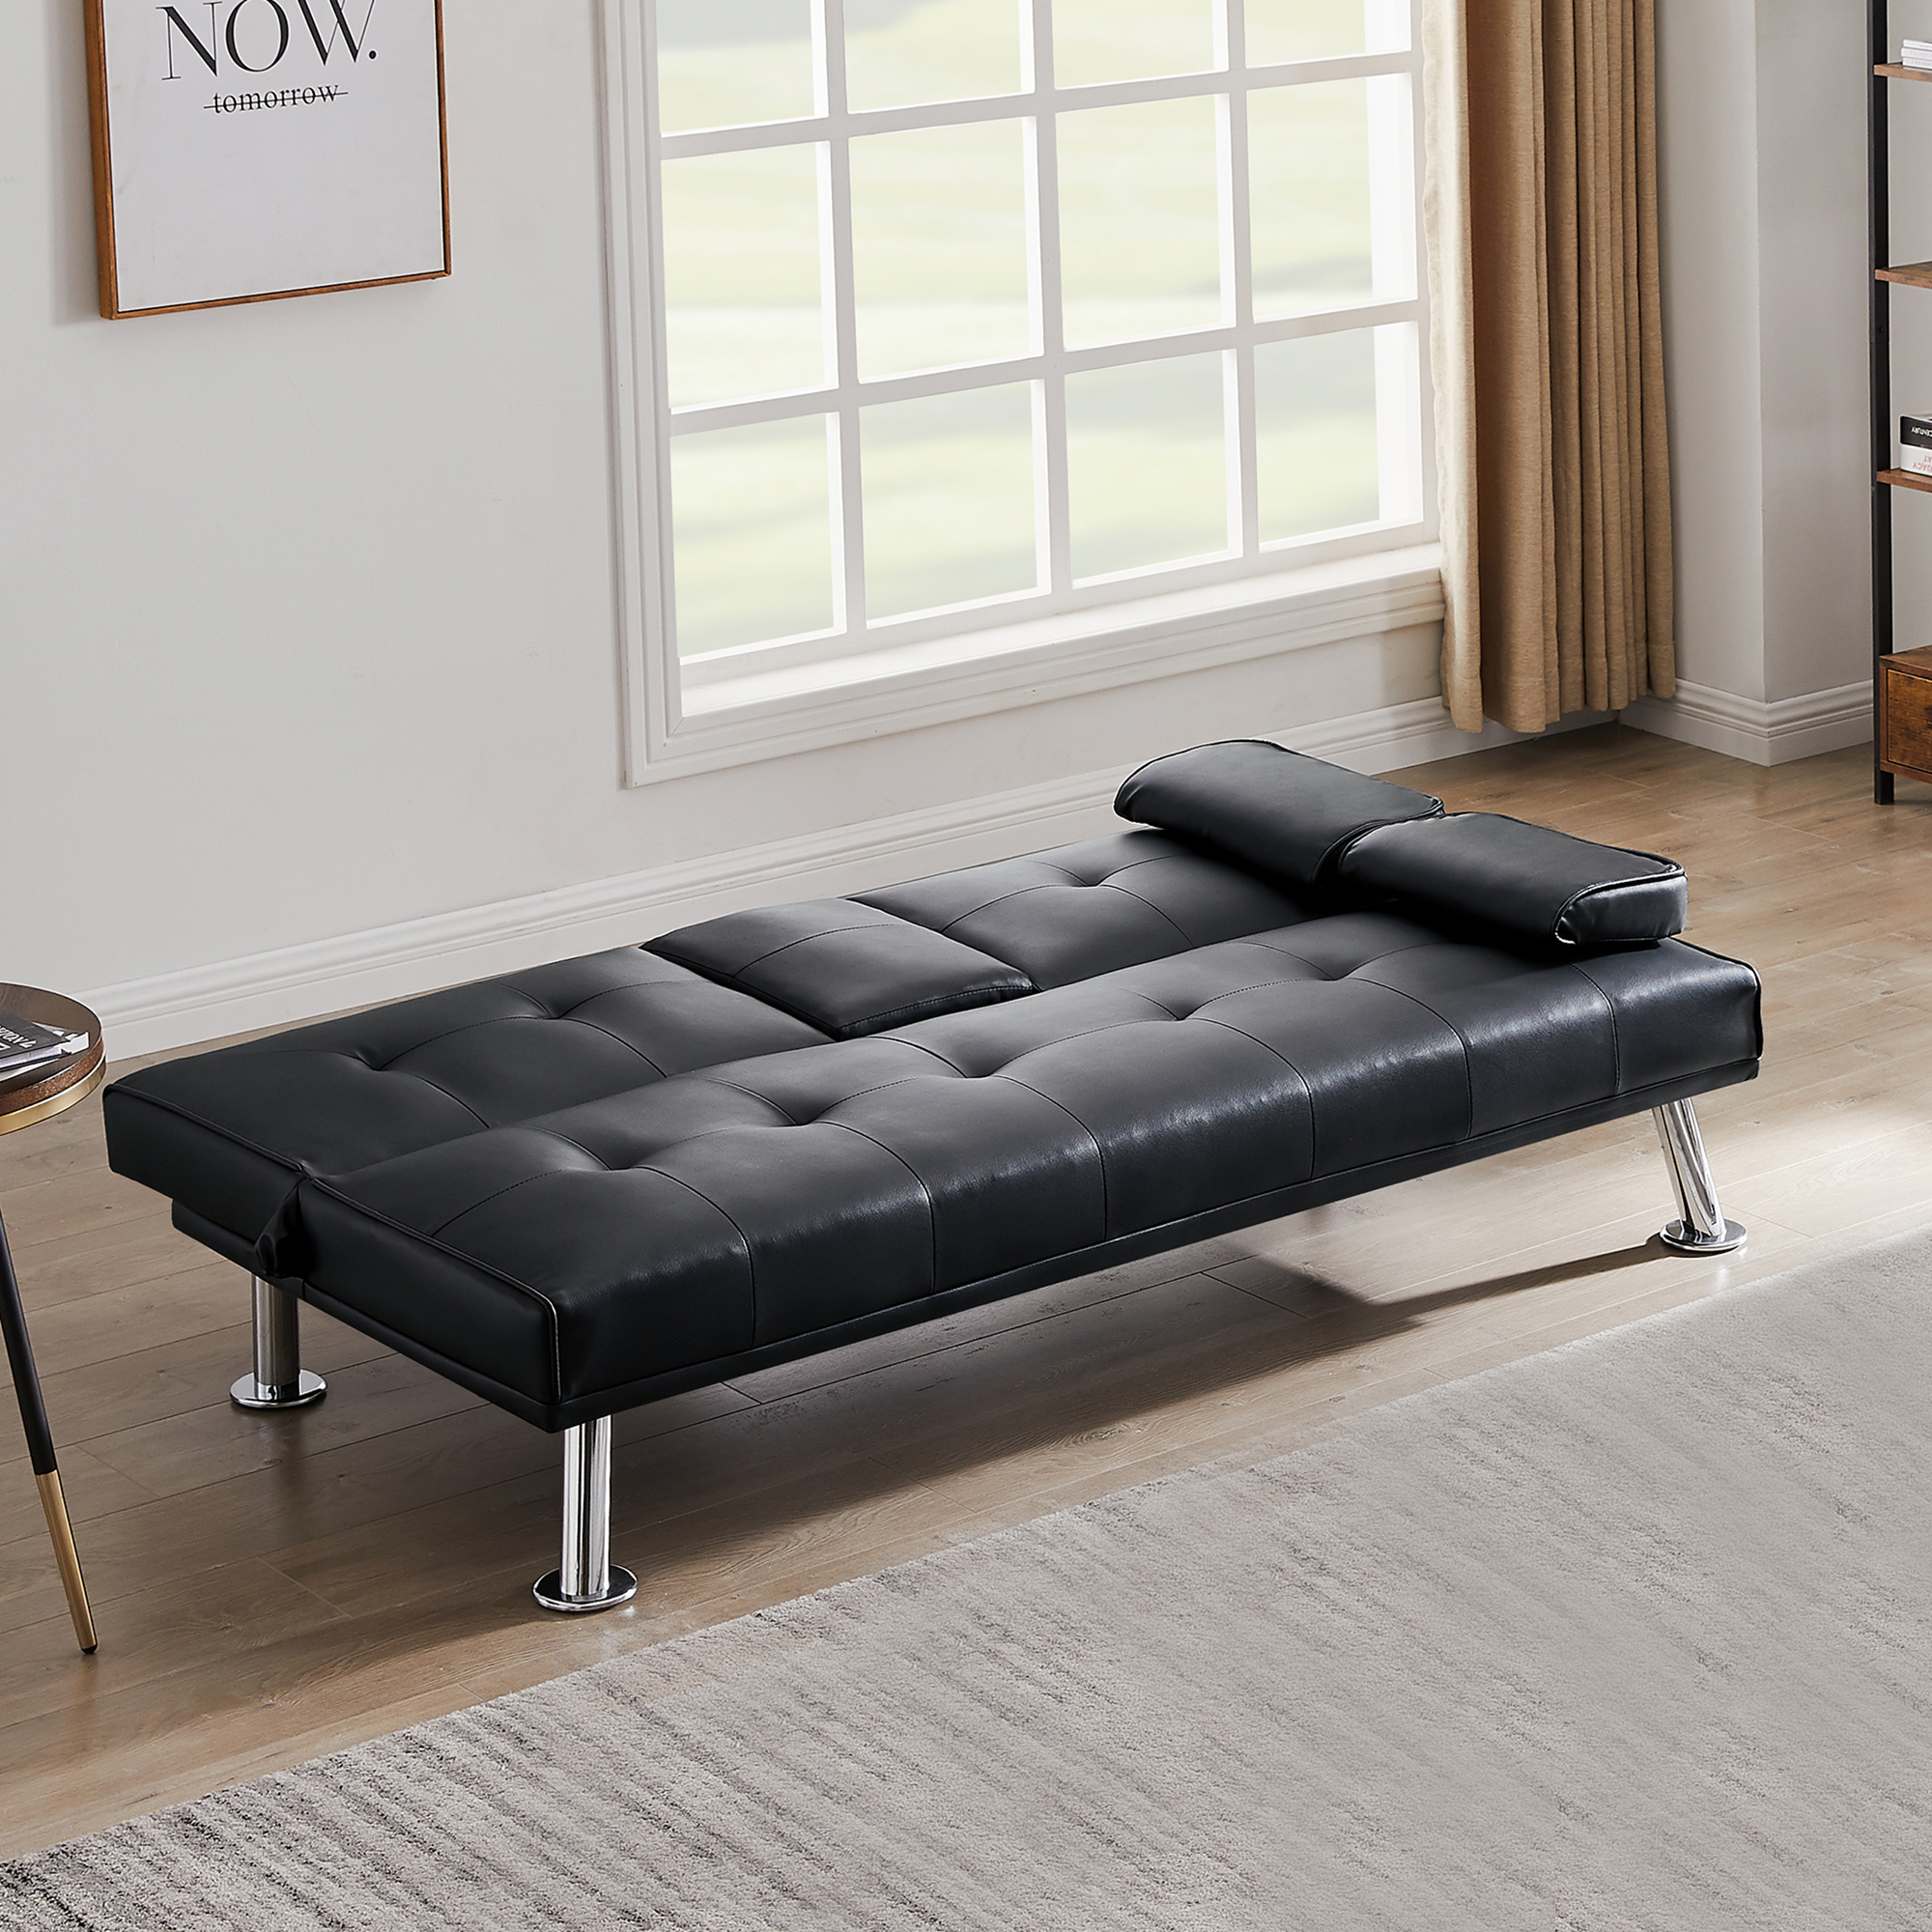 Modern Faux Leather Loveseat Sofa Bed with Cup Holders , Convertible Folding Sleeper Couch Bed .-Boyel Living